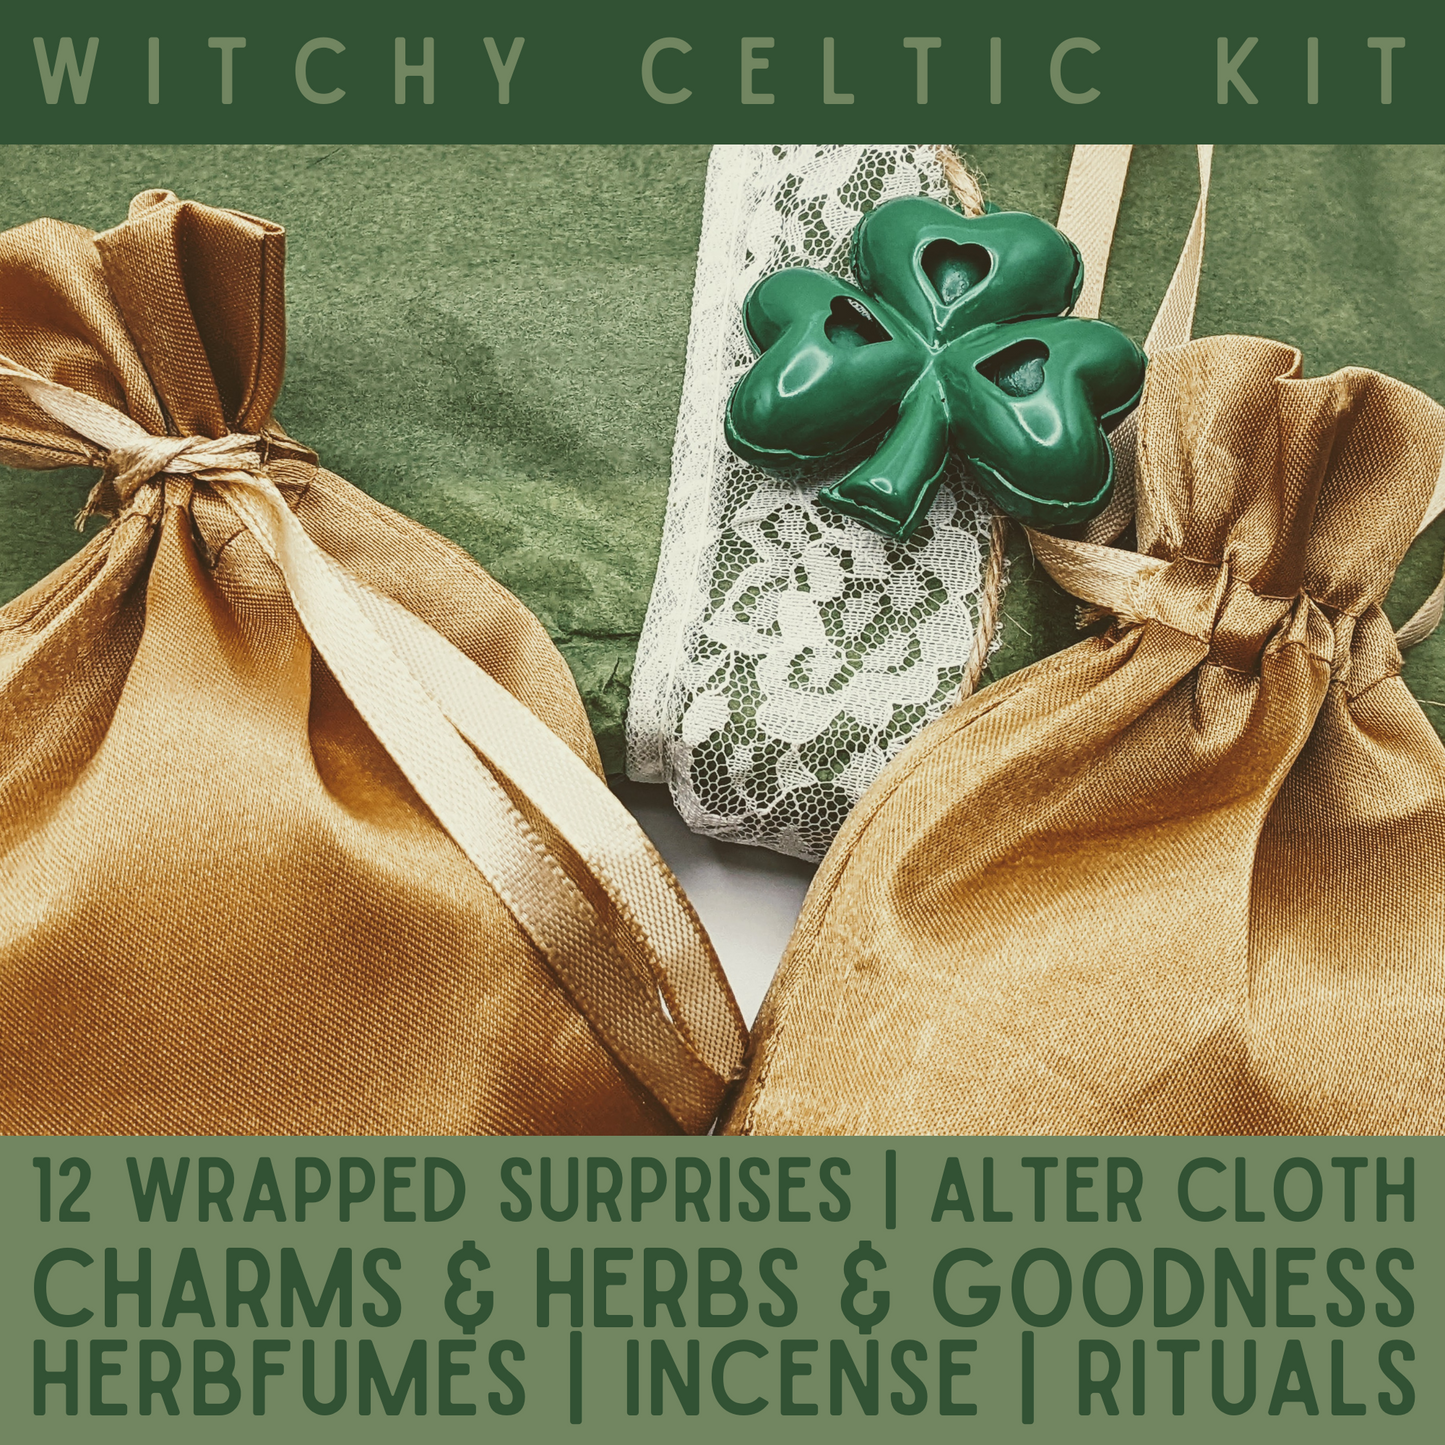 Celtic Witchy Gift Kit (7Day or12 Day Countdown) Herbteller Giftset